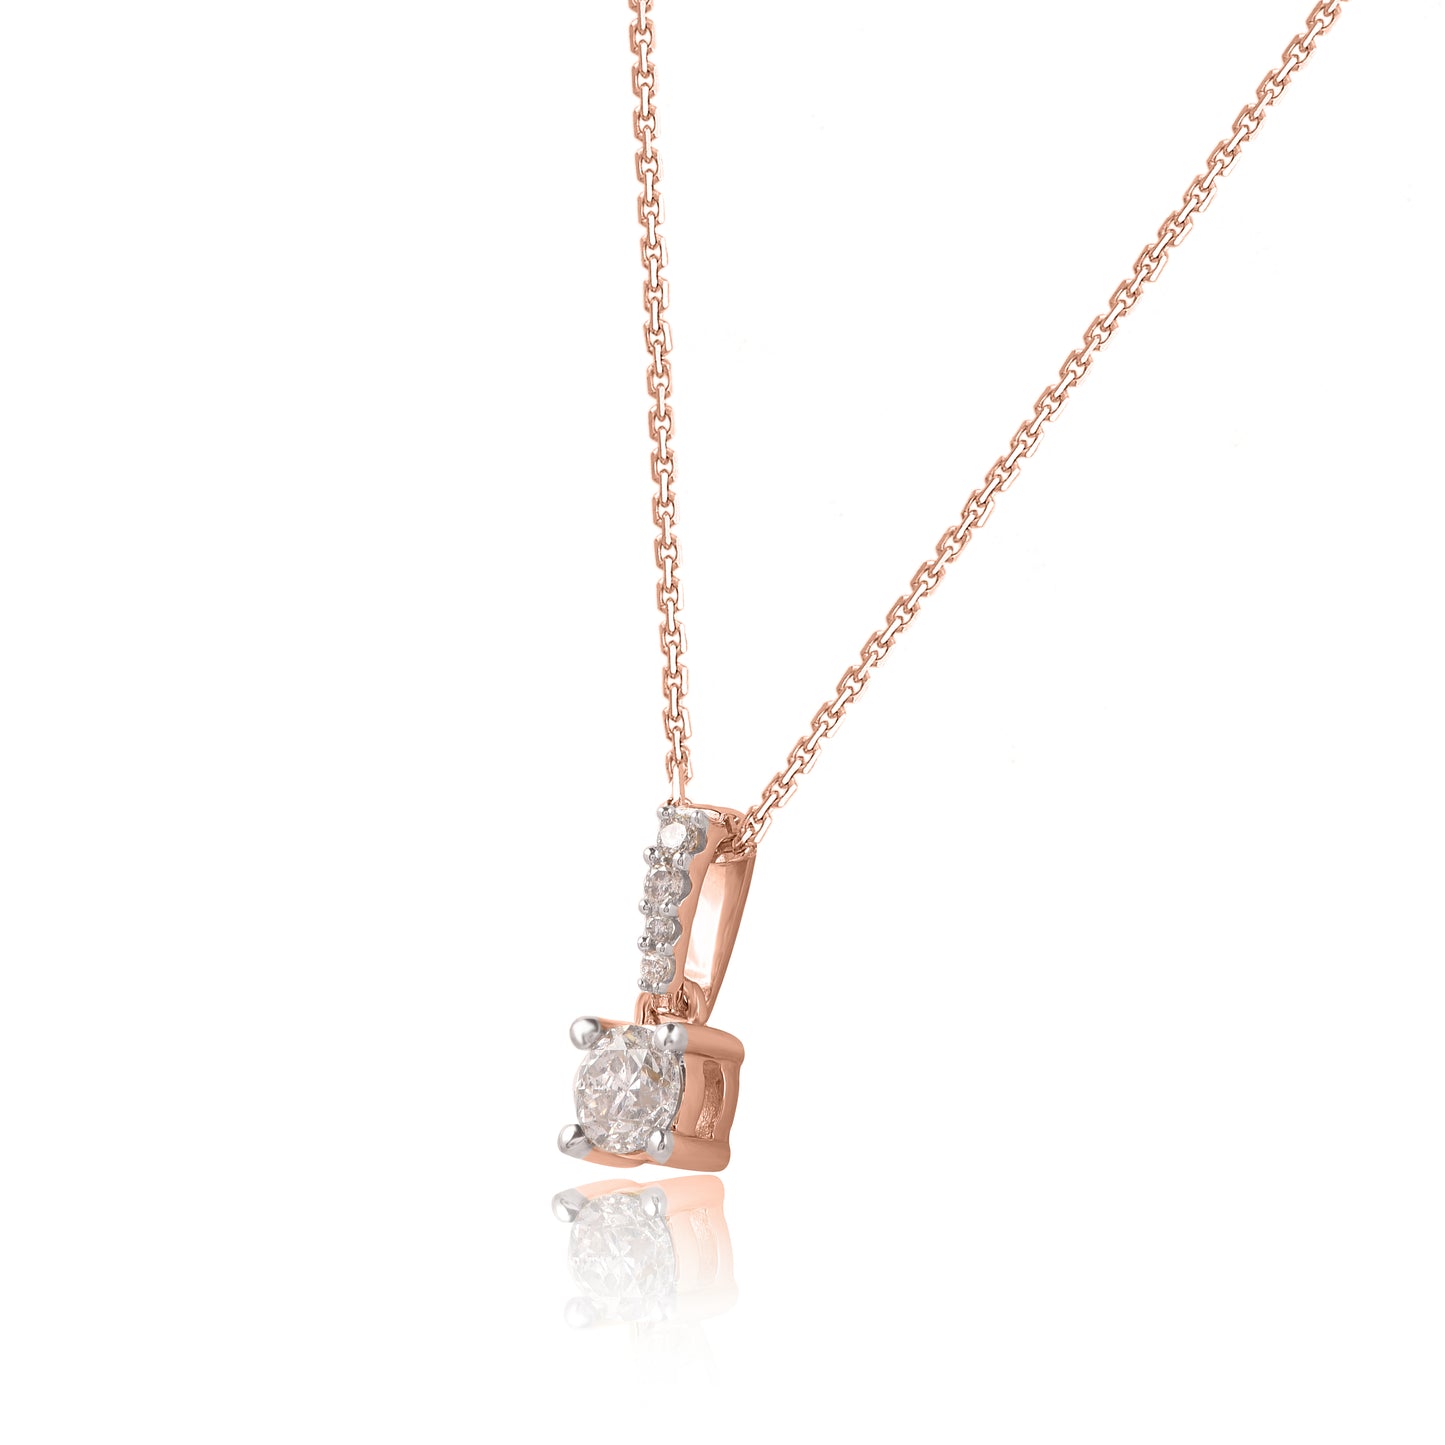 Solitaire Diamond Pendant Necklace in 10K Gold